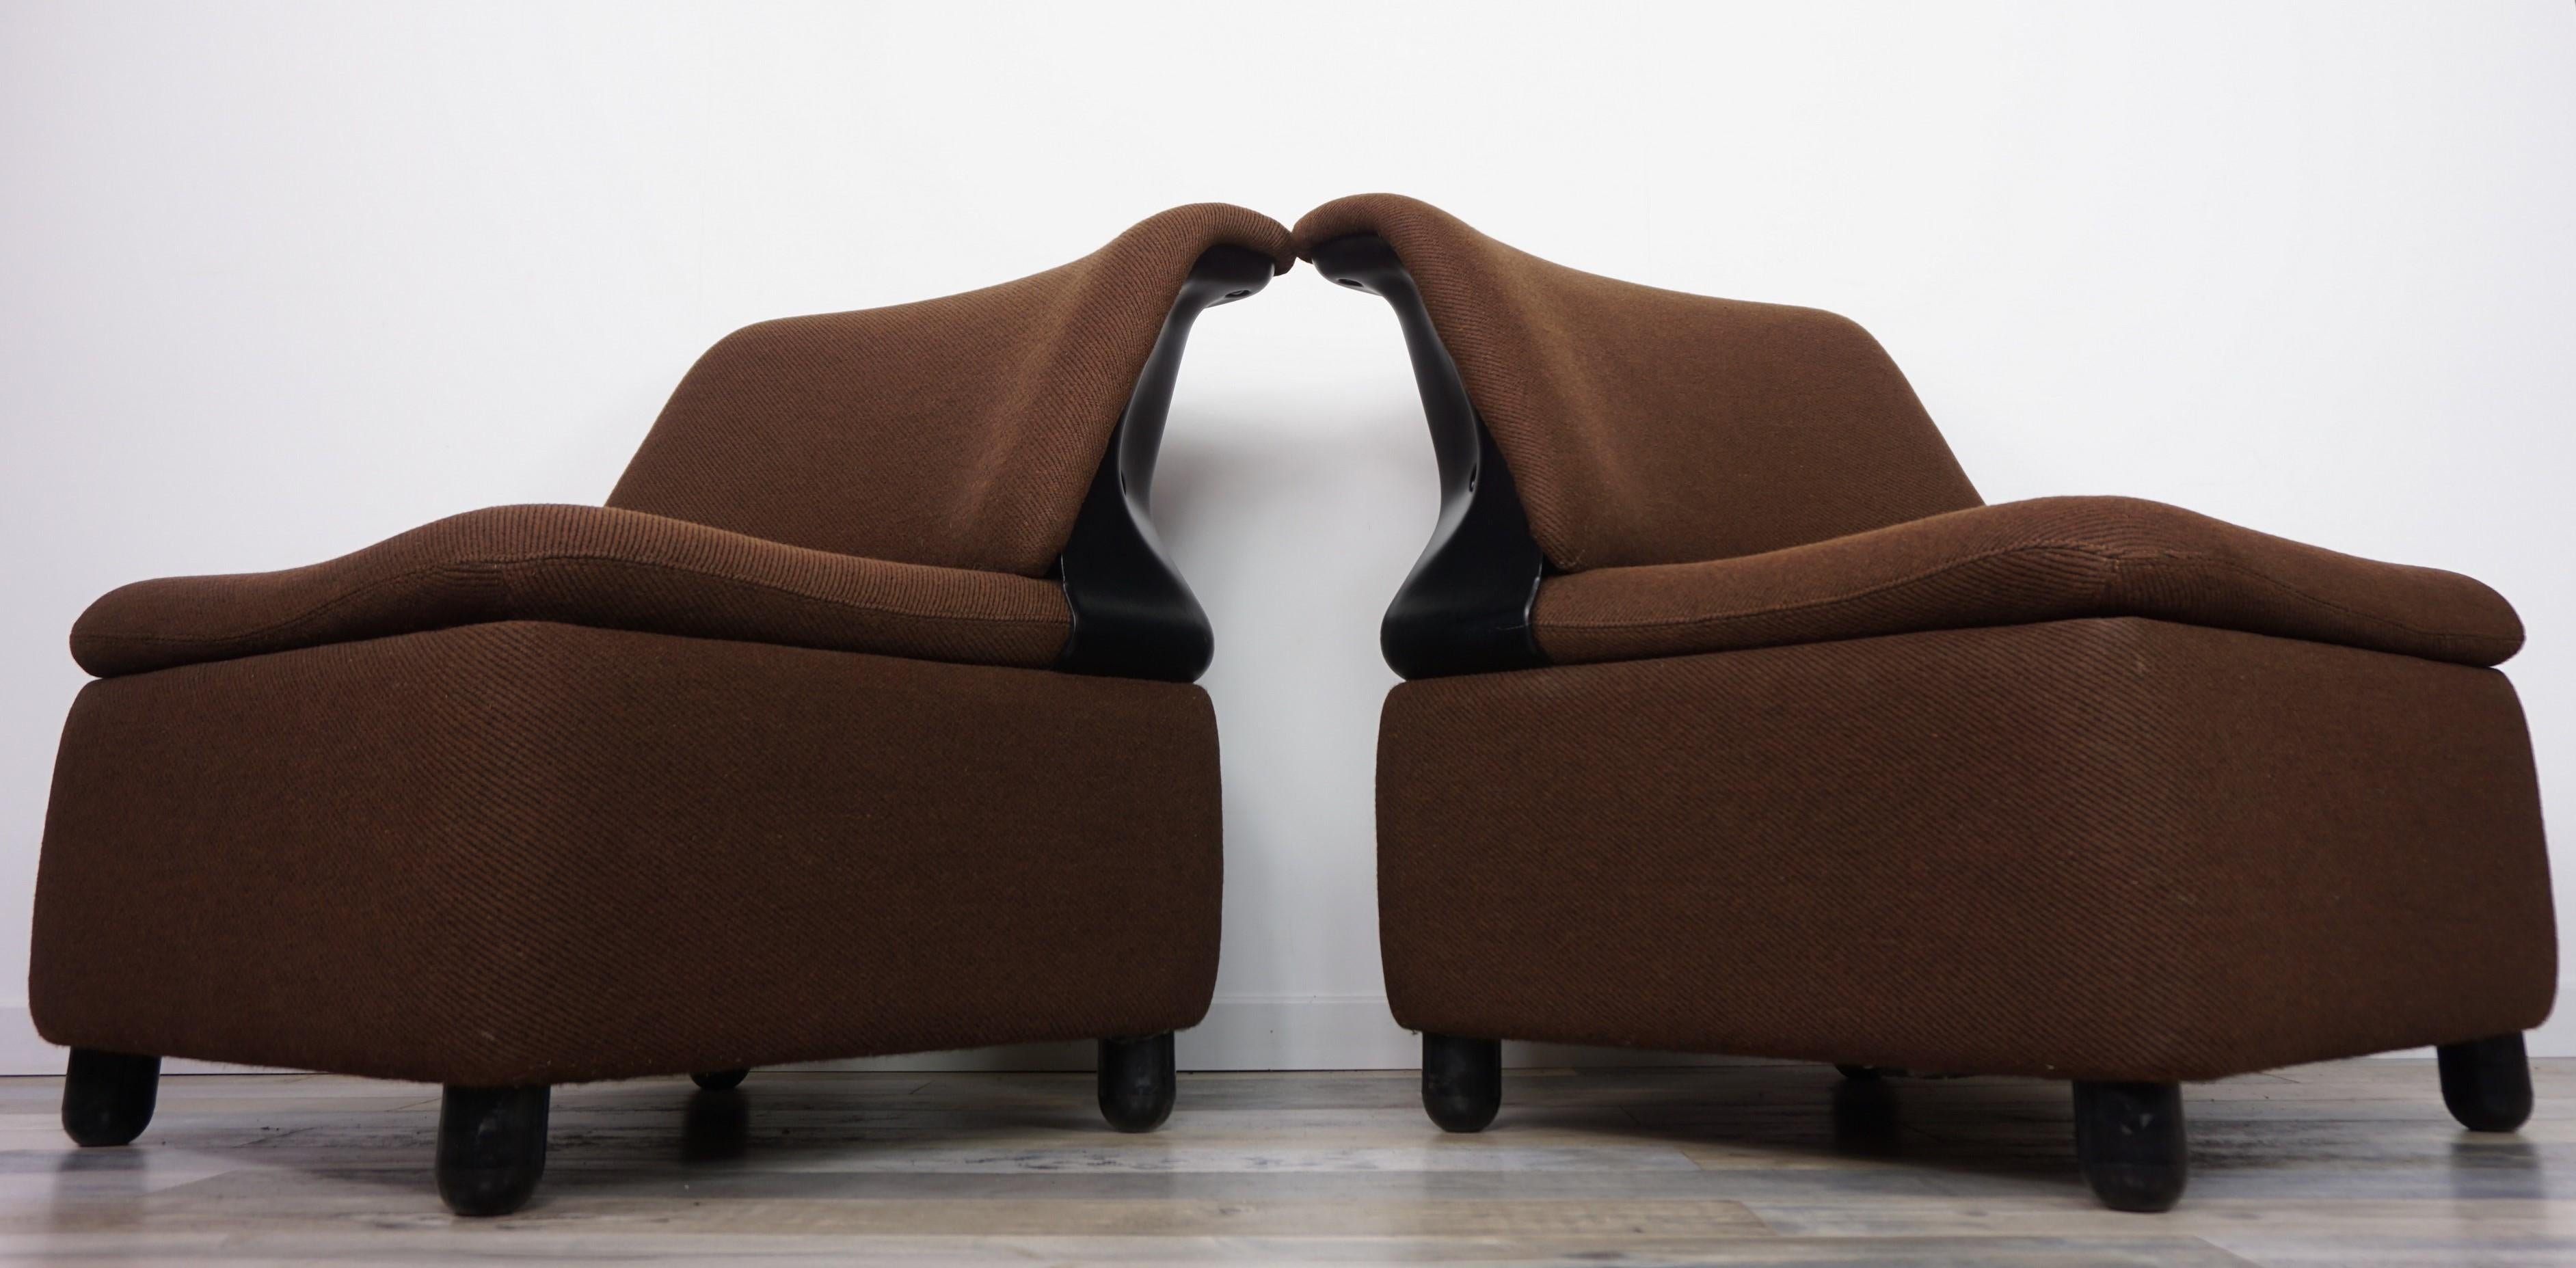 Pair of dark brown fabric lounge armchairs, outstanding shape, comfortable, and so vintage!